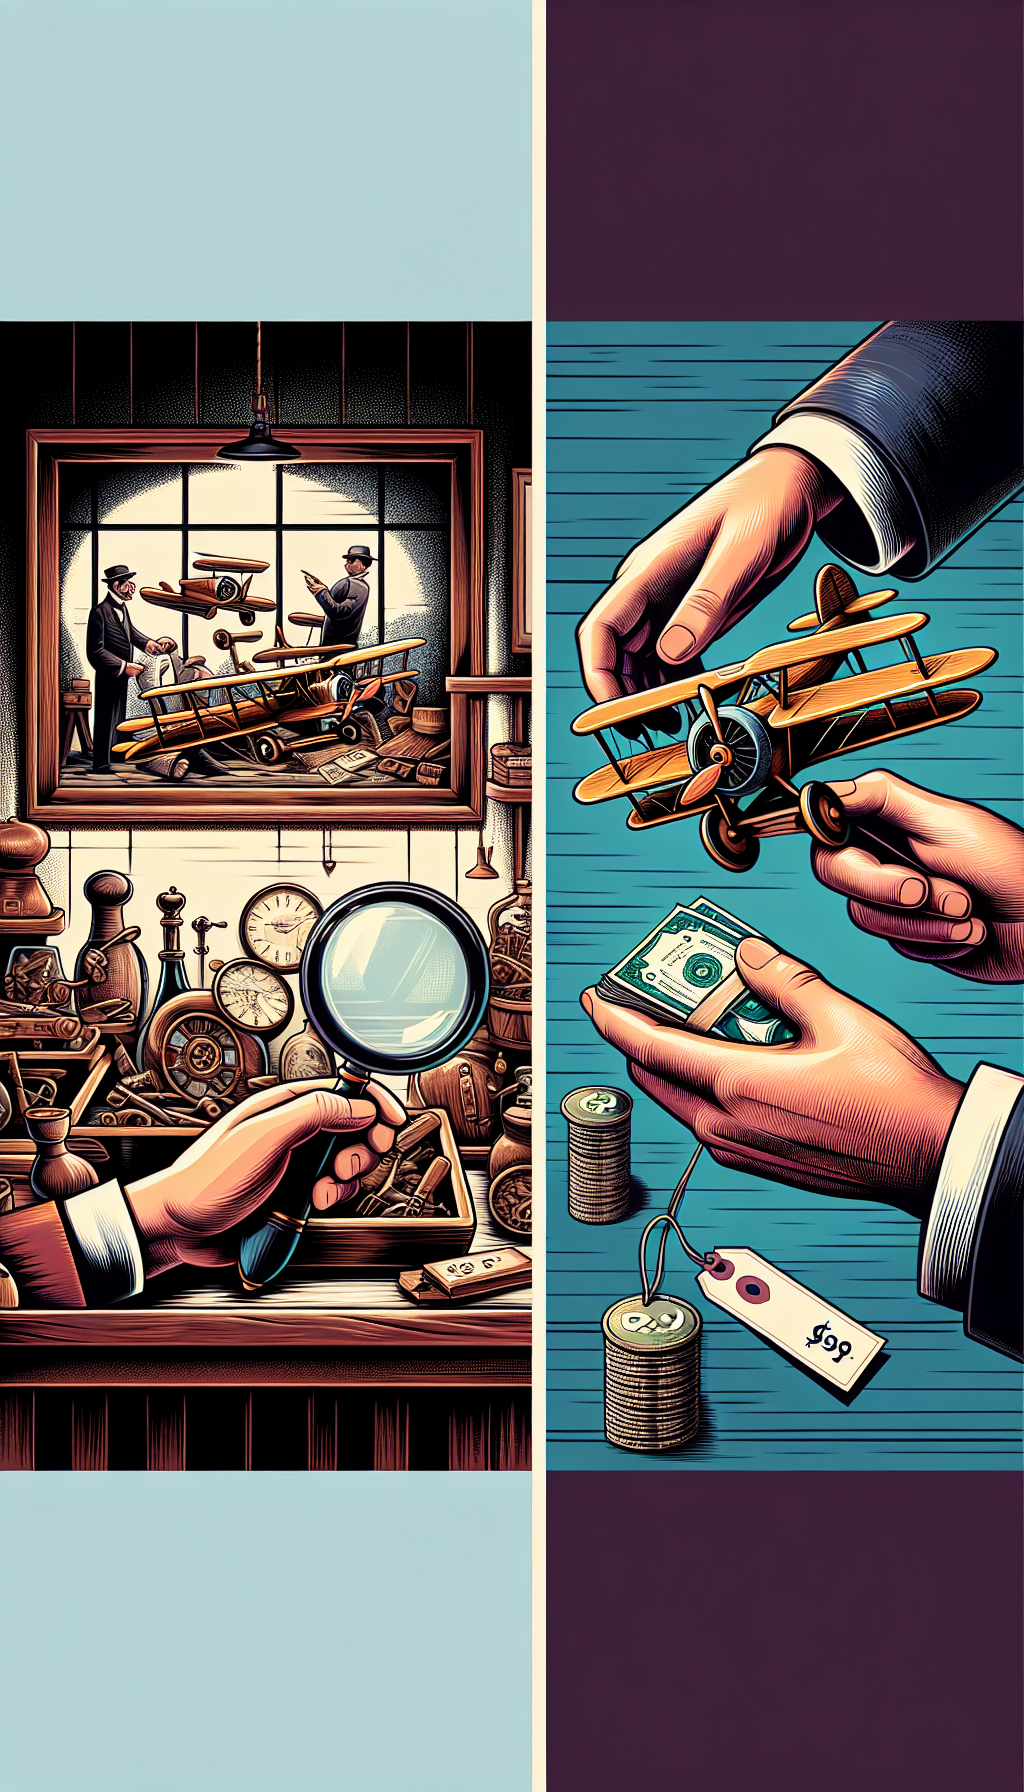 An illustration features a split scene with one side portraying a stylized antique shop, where a collector's hand holds a magnifying glass scrutinizing the intricate details of a vintage wood plane, reflecting its value. The other side shows hands exchanging cash and the plane, with visible price tags indicating escalating values. The juxtaposition highlights the careful acquisition and profitable sale of these collectibles.